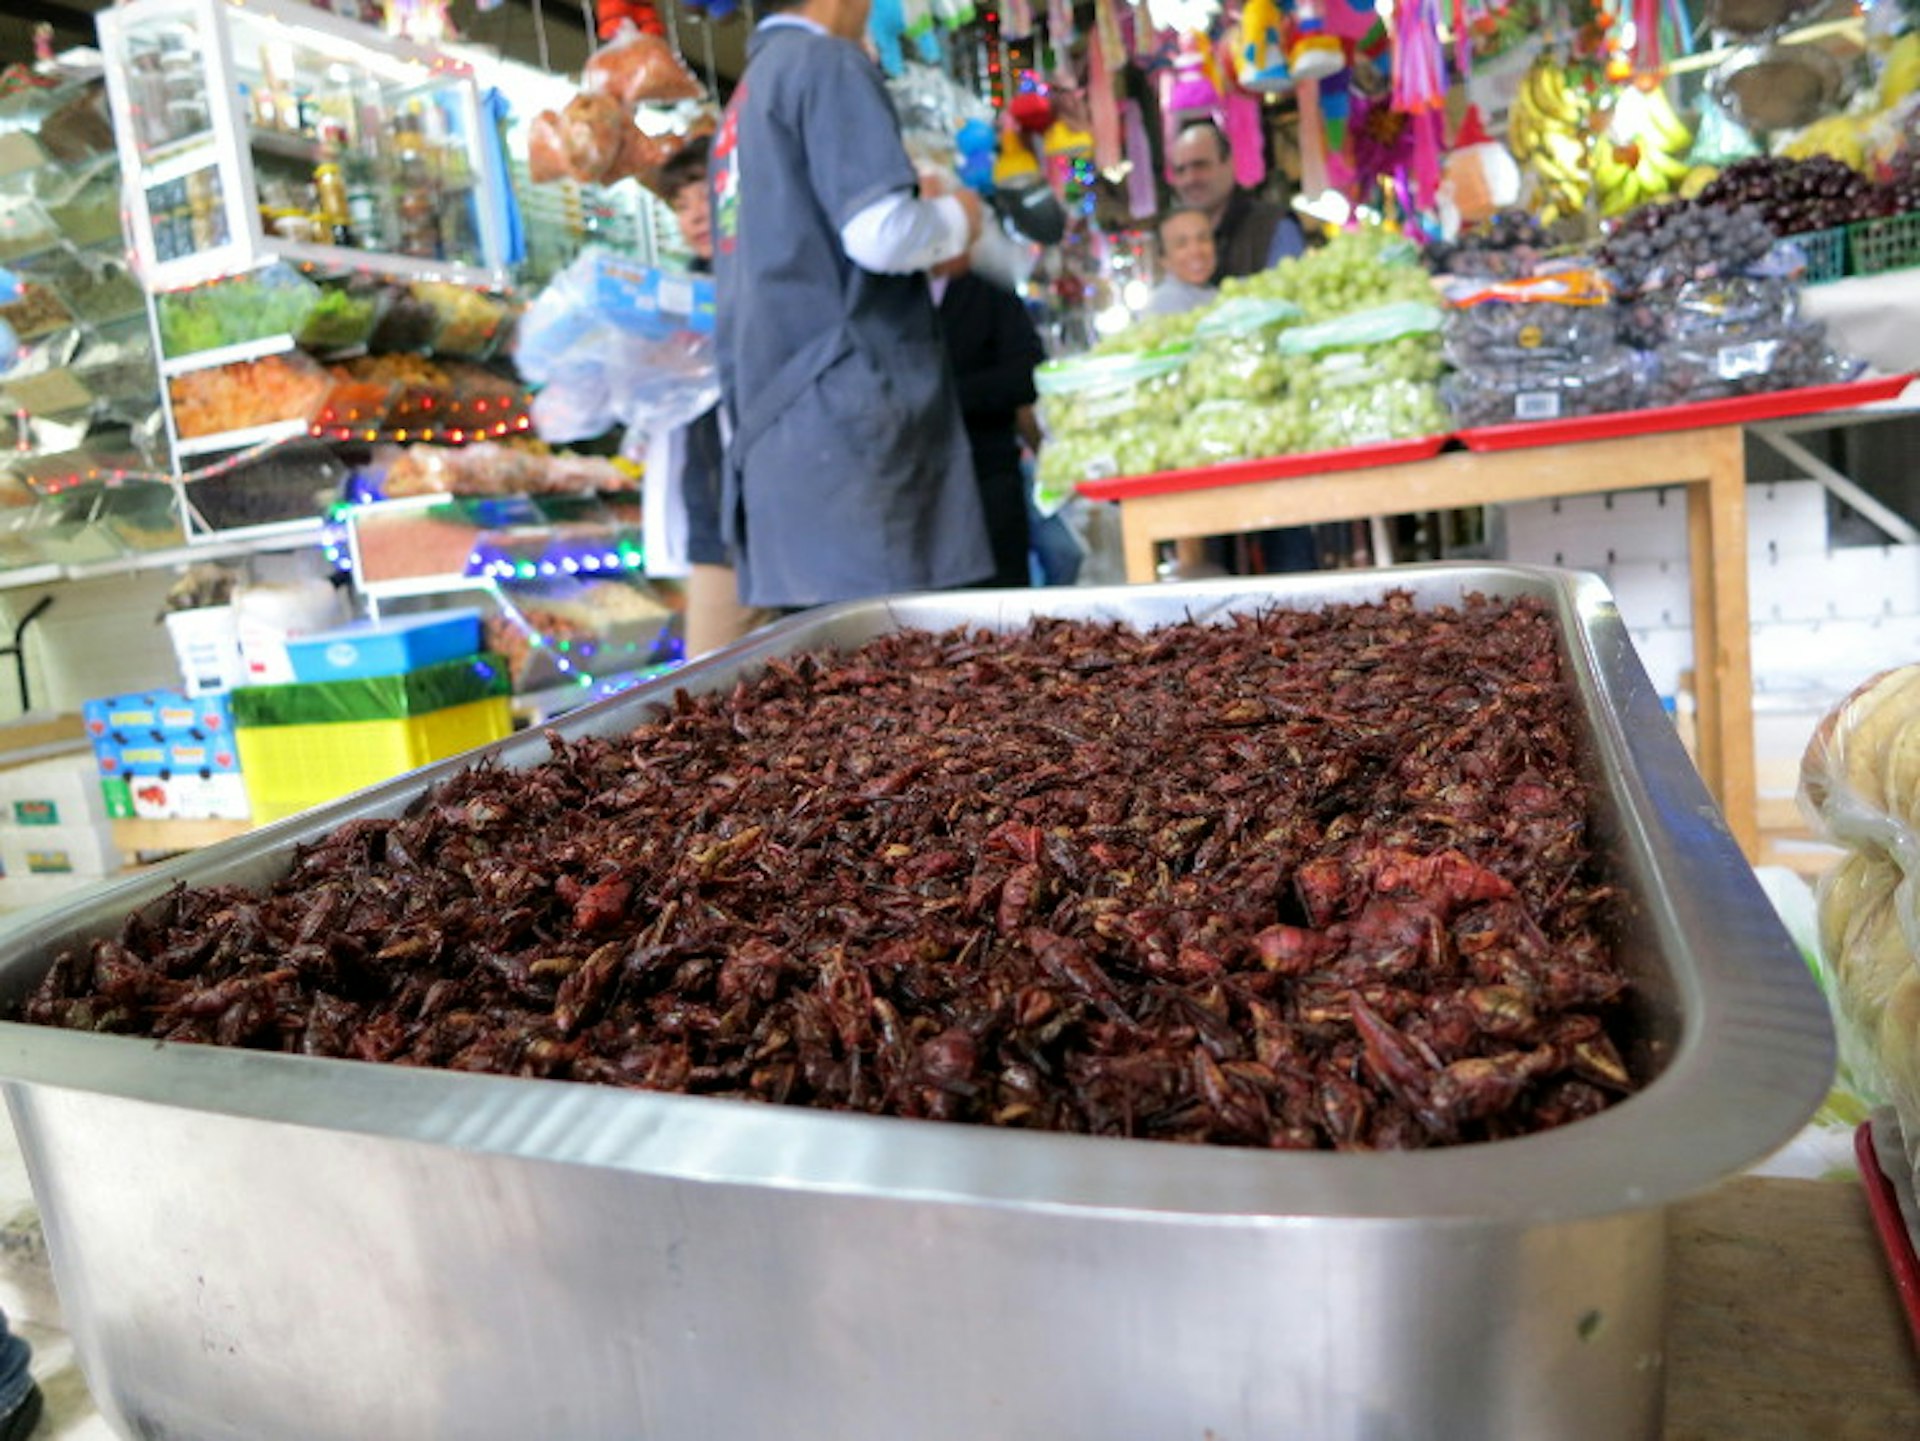 Insects for lunch? Anyone? Anyone? Image by John Hecht / Lonely Planet